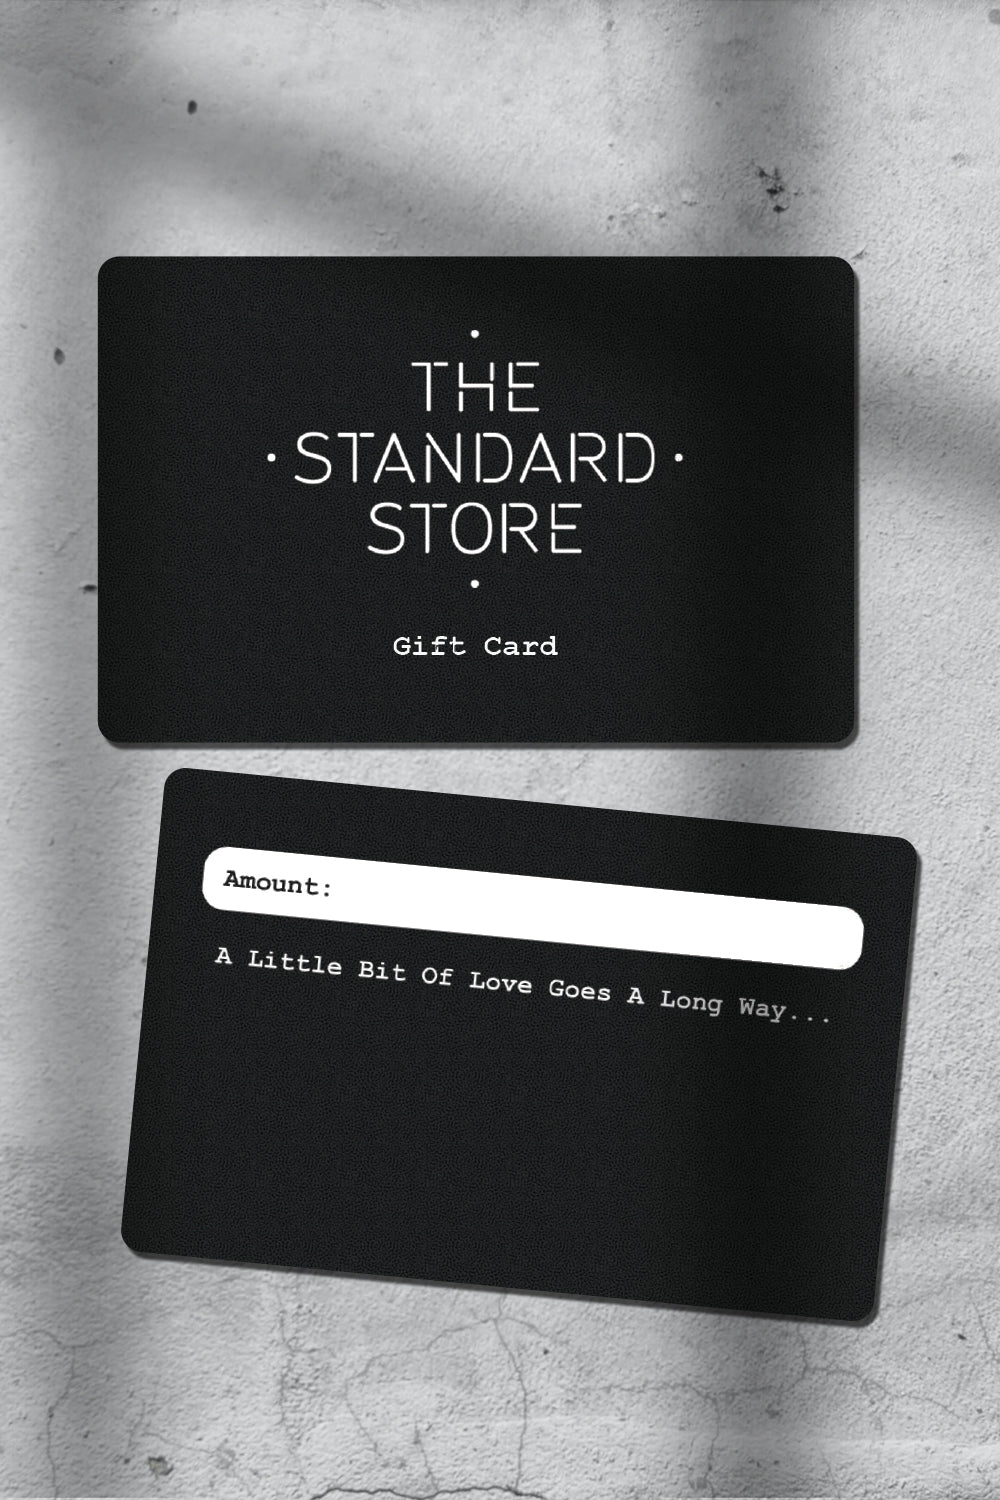 The Standard Store Gift Card